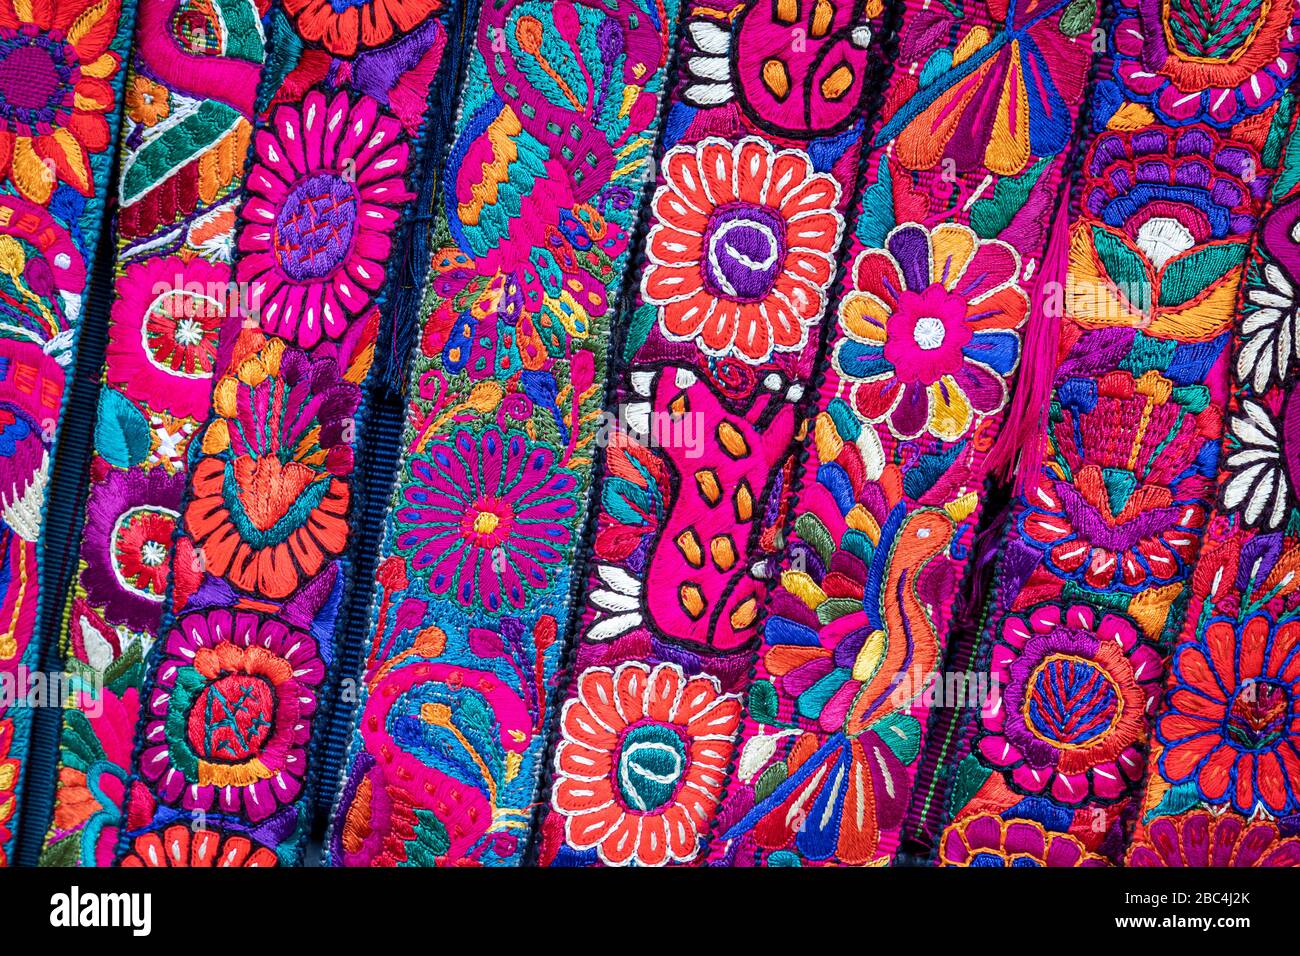 Bold colored textiles for sale in the market of Chichicastenango, Guatemala. Stock Photo